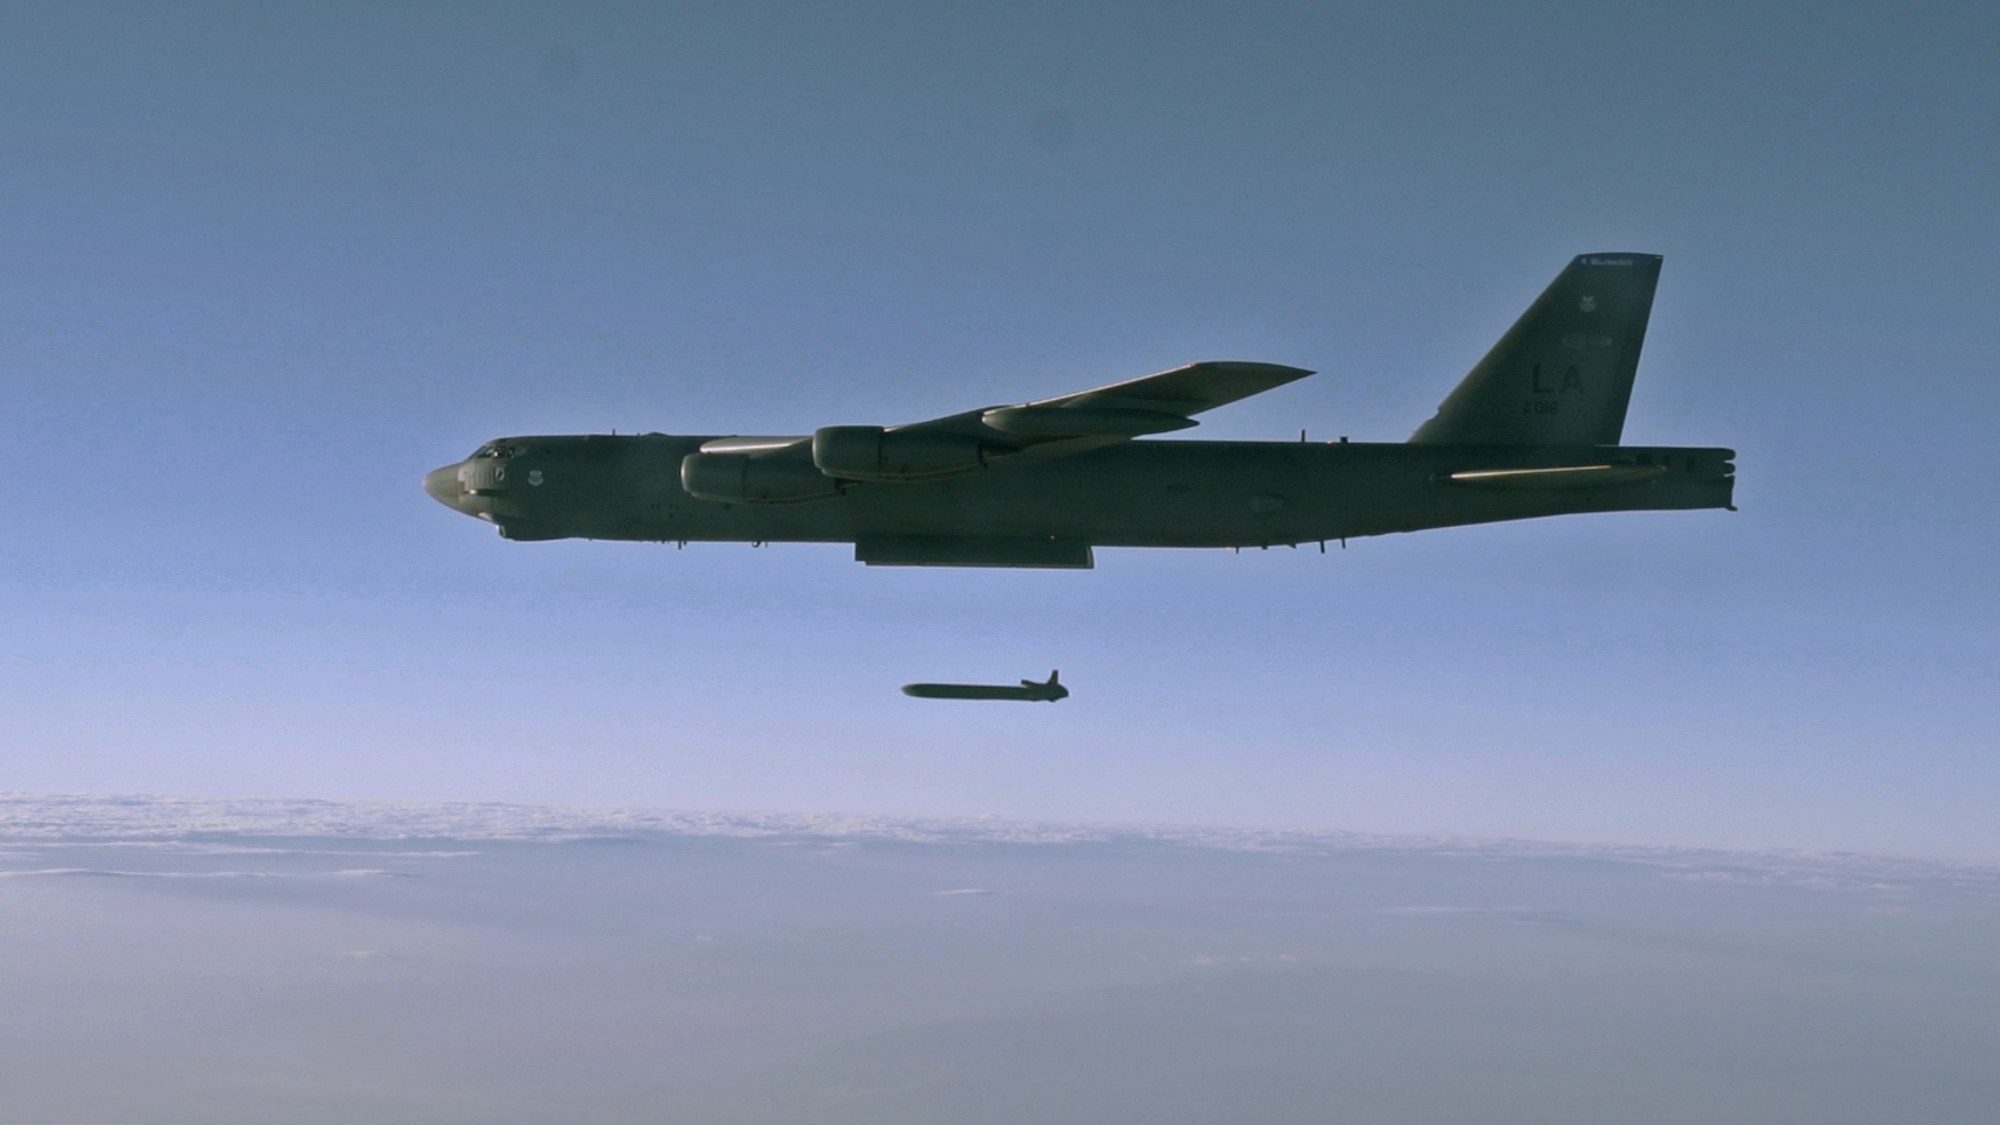 An unarmed AGM-86B Air-Launched Cruise Missile is released from a B-52H Stratofortress Sept. 22, 2014, over the Utah Test and Training Range during a Nuclear Weapons System Evaluation Program sortie. Conducted by Airmen from the 2nd Bomb Wing, Barksdale Air Force Base, La., the launch was part of an end-to-end operational evaluation of 8th Air Force and Task Force 204’s ability to pull an ALCM from storage, load it aboard an aircraft, execute a simulated combat mission tasking and successfully deliver the weapon from the aircraft to its final target. (U.S. Air Force photo/Staff Sgt. Roidan Carlson)